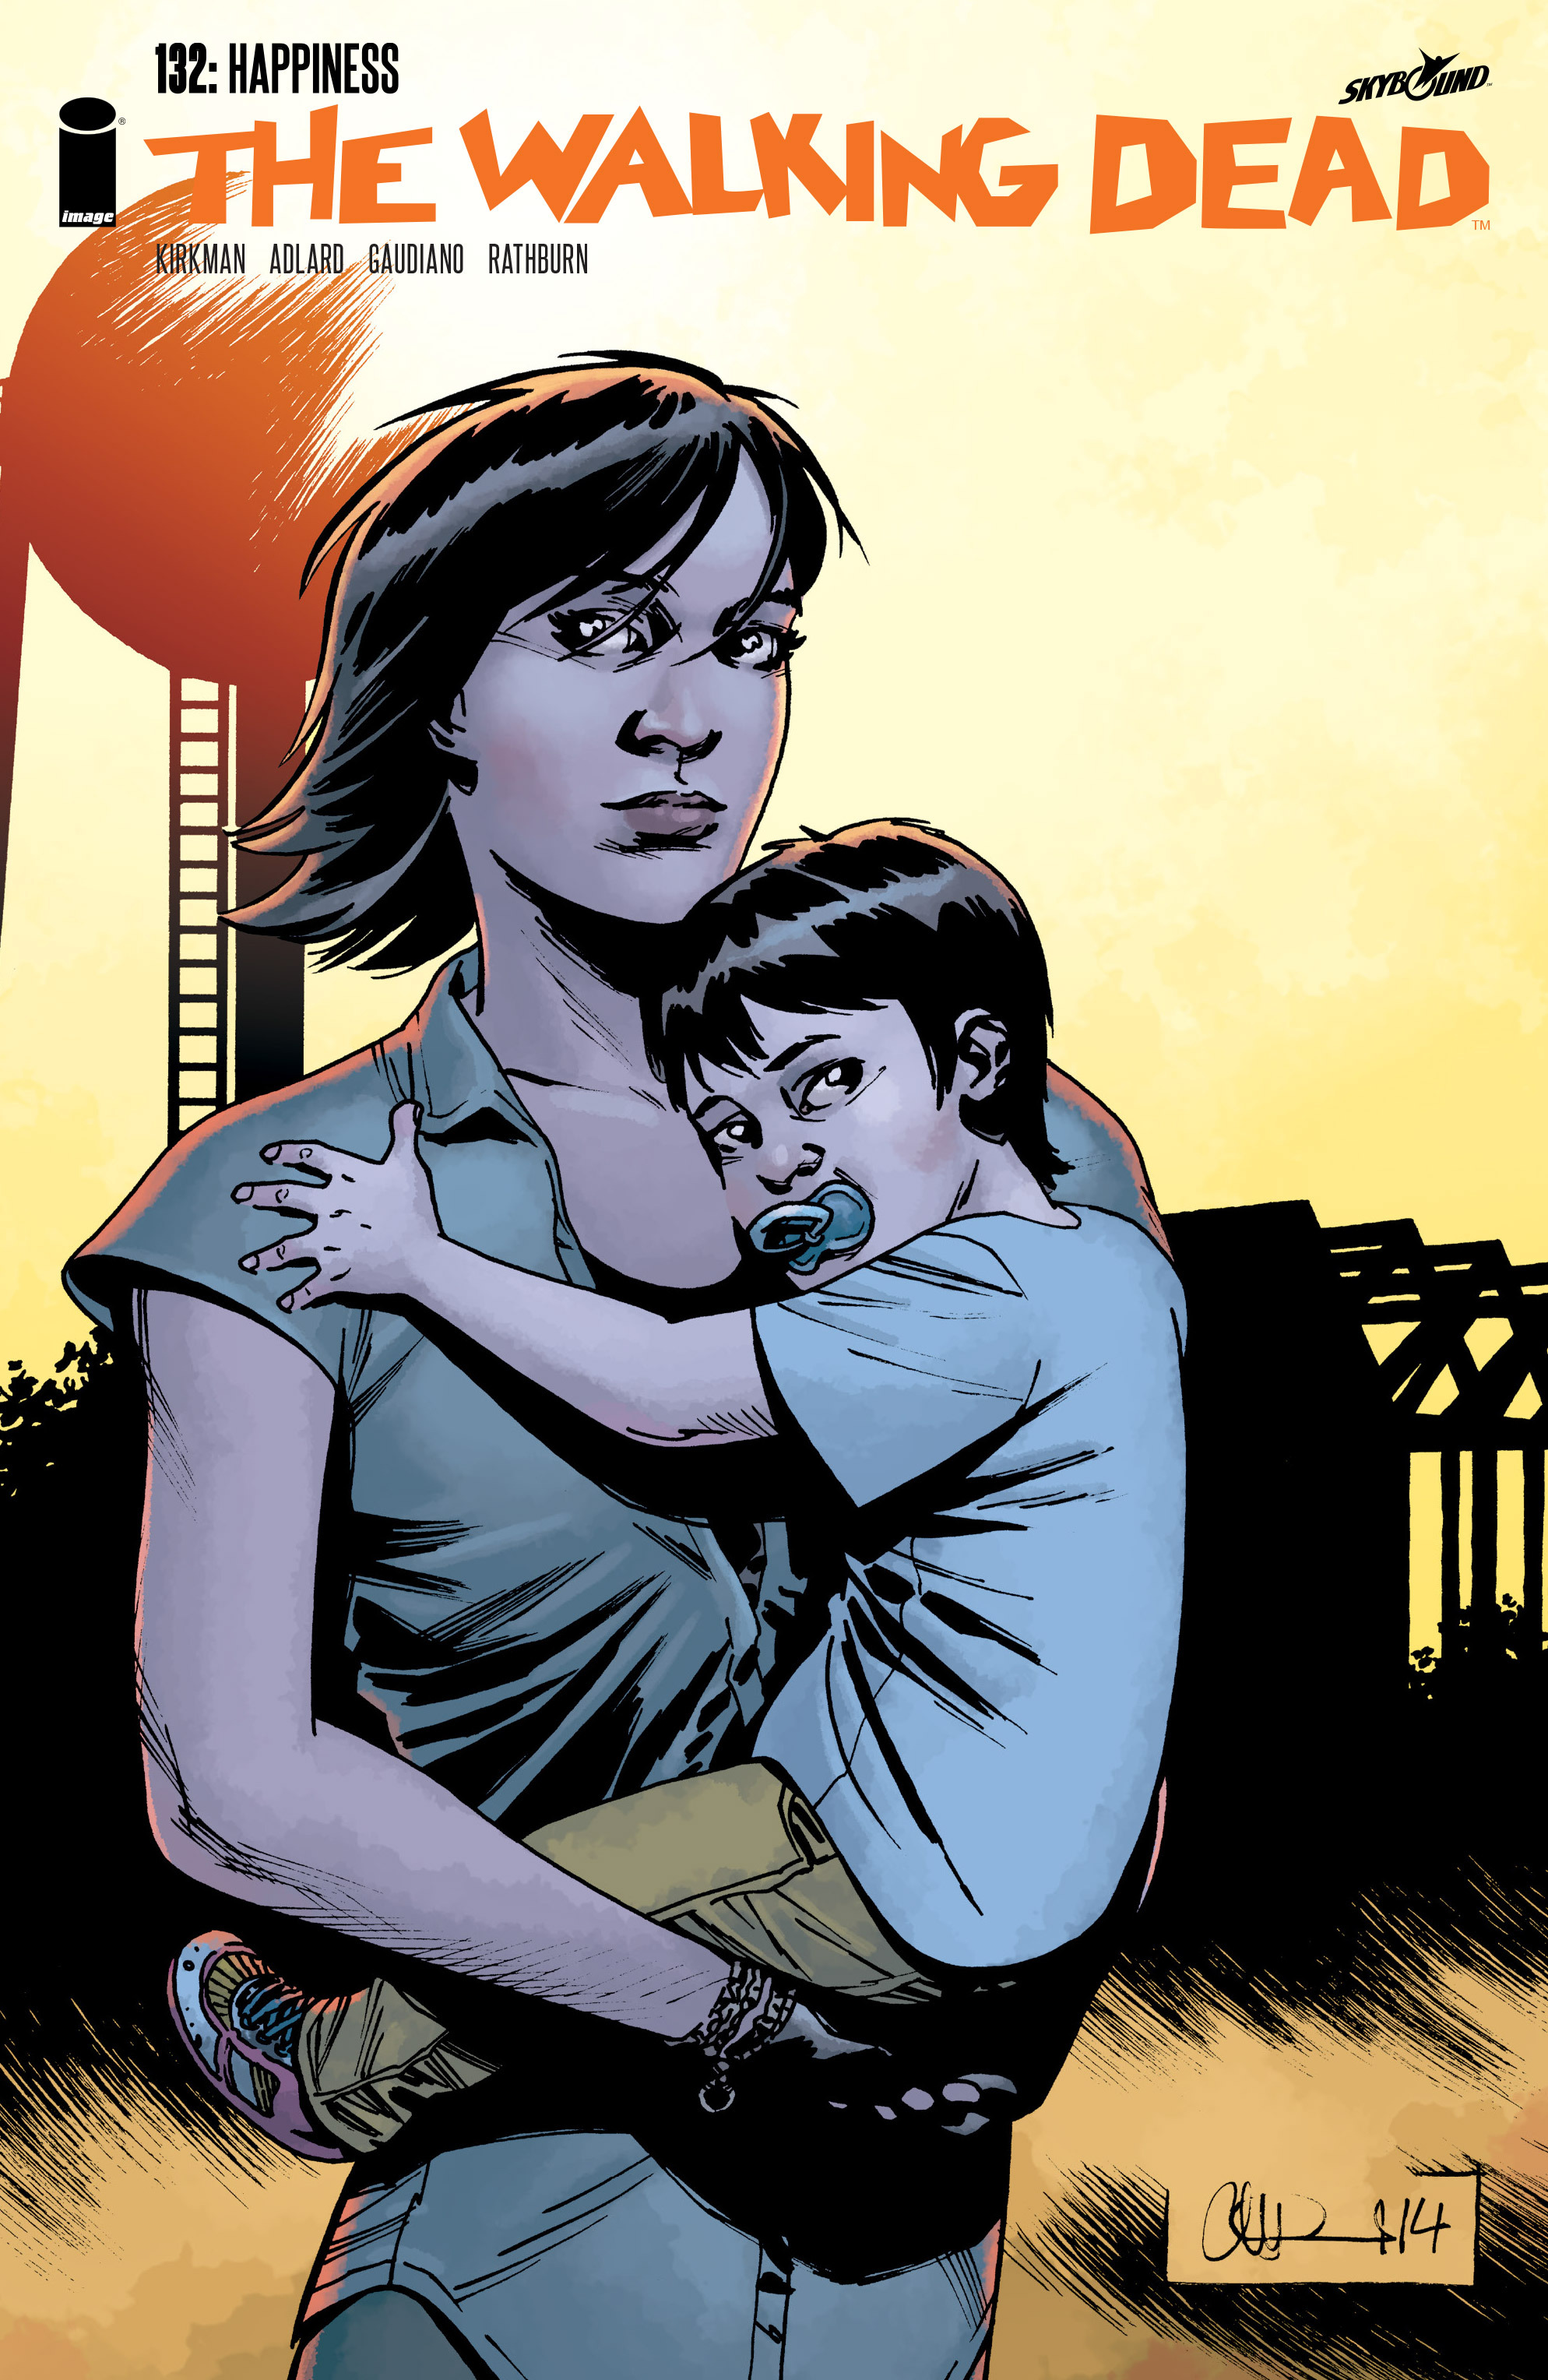 The Walking Dead 132 Page 1